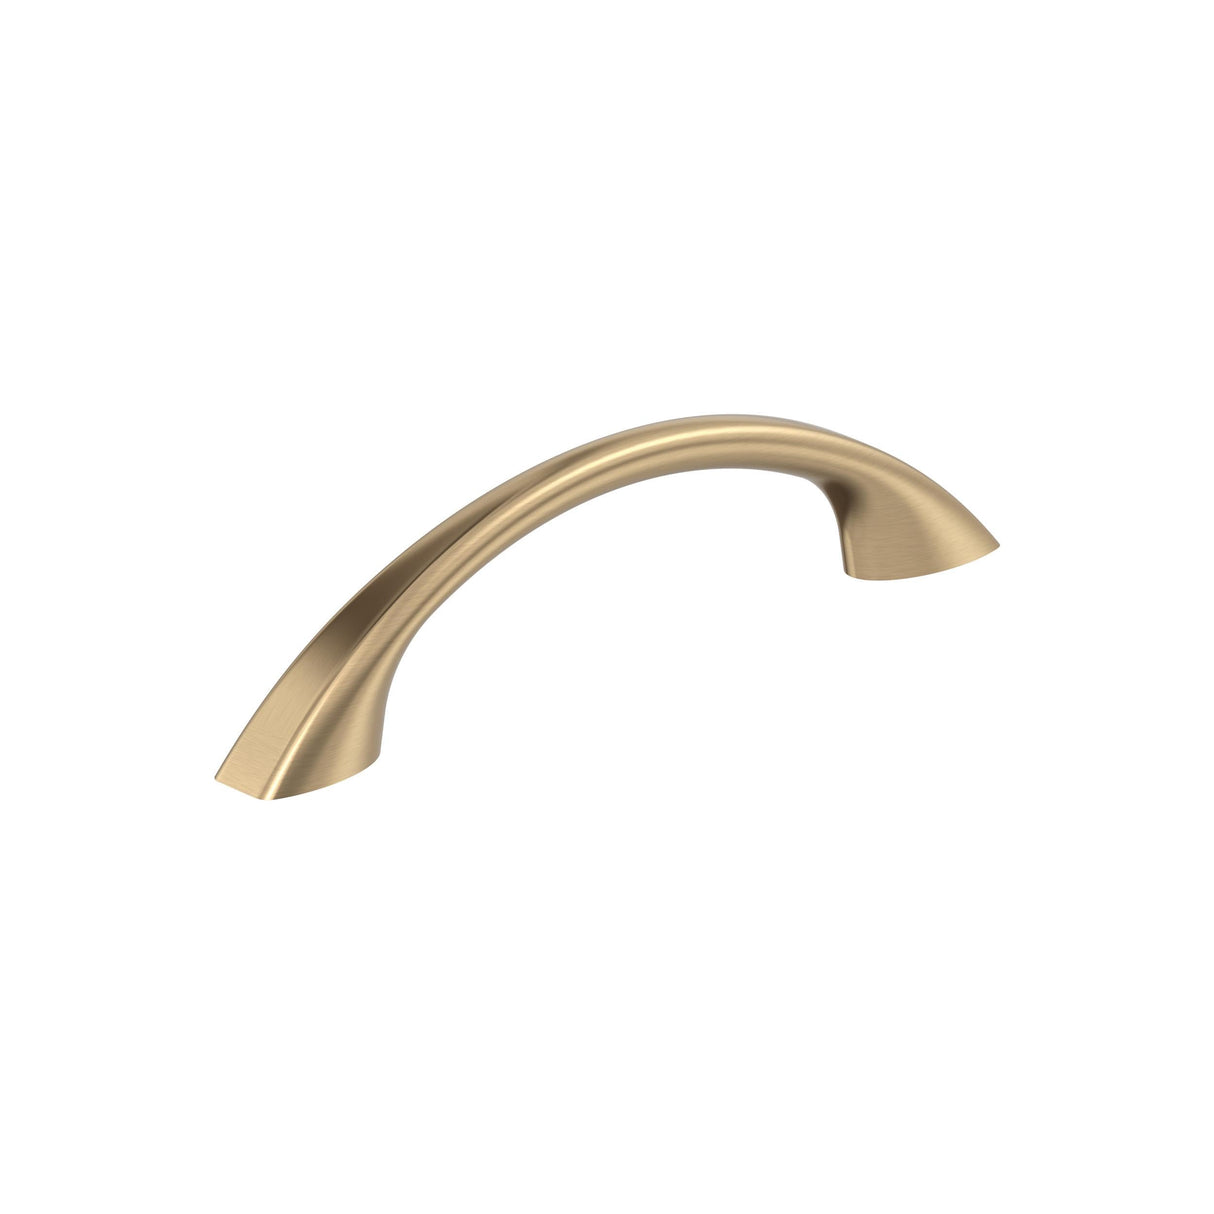 Amerock BP53003CZ Champagne Bronze Cabinet Pull 3-3/4 inch (96mm) Center-to-Center Cabinet Hardware Vaile Furniture Hardware Drawer Pull